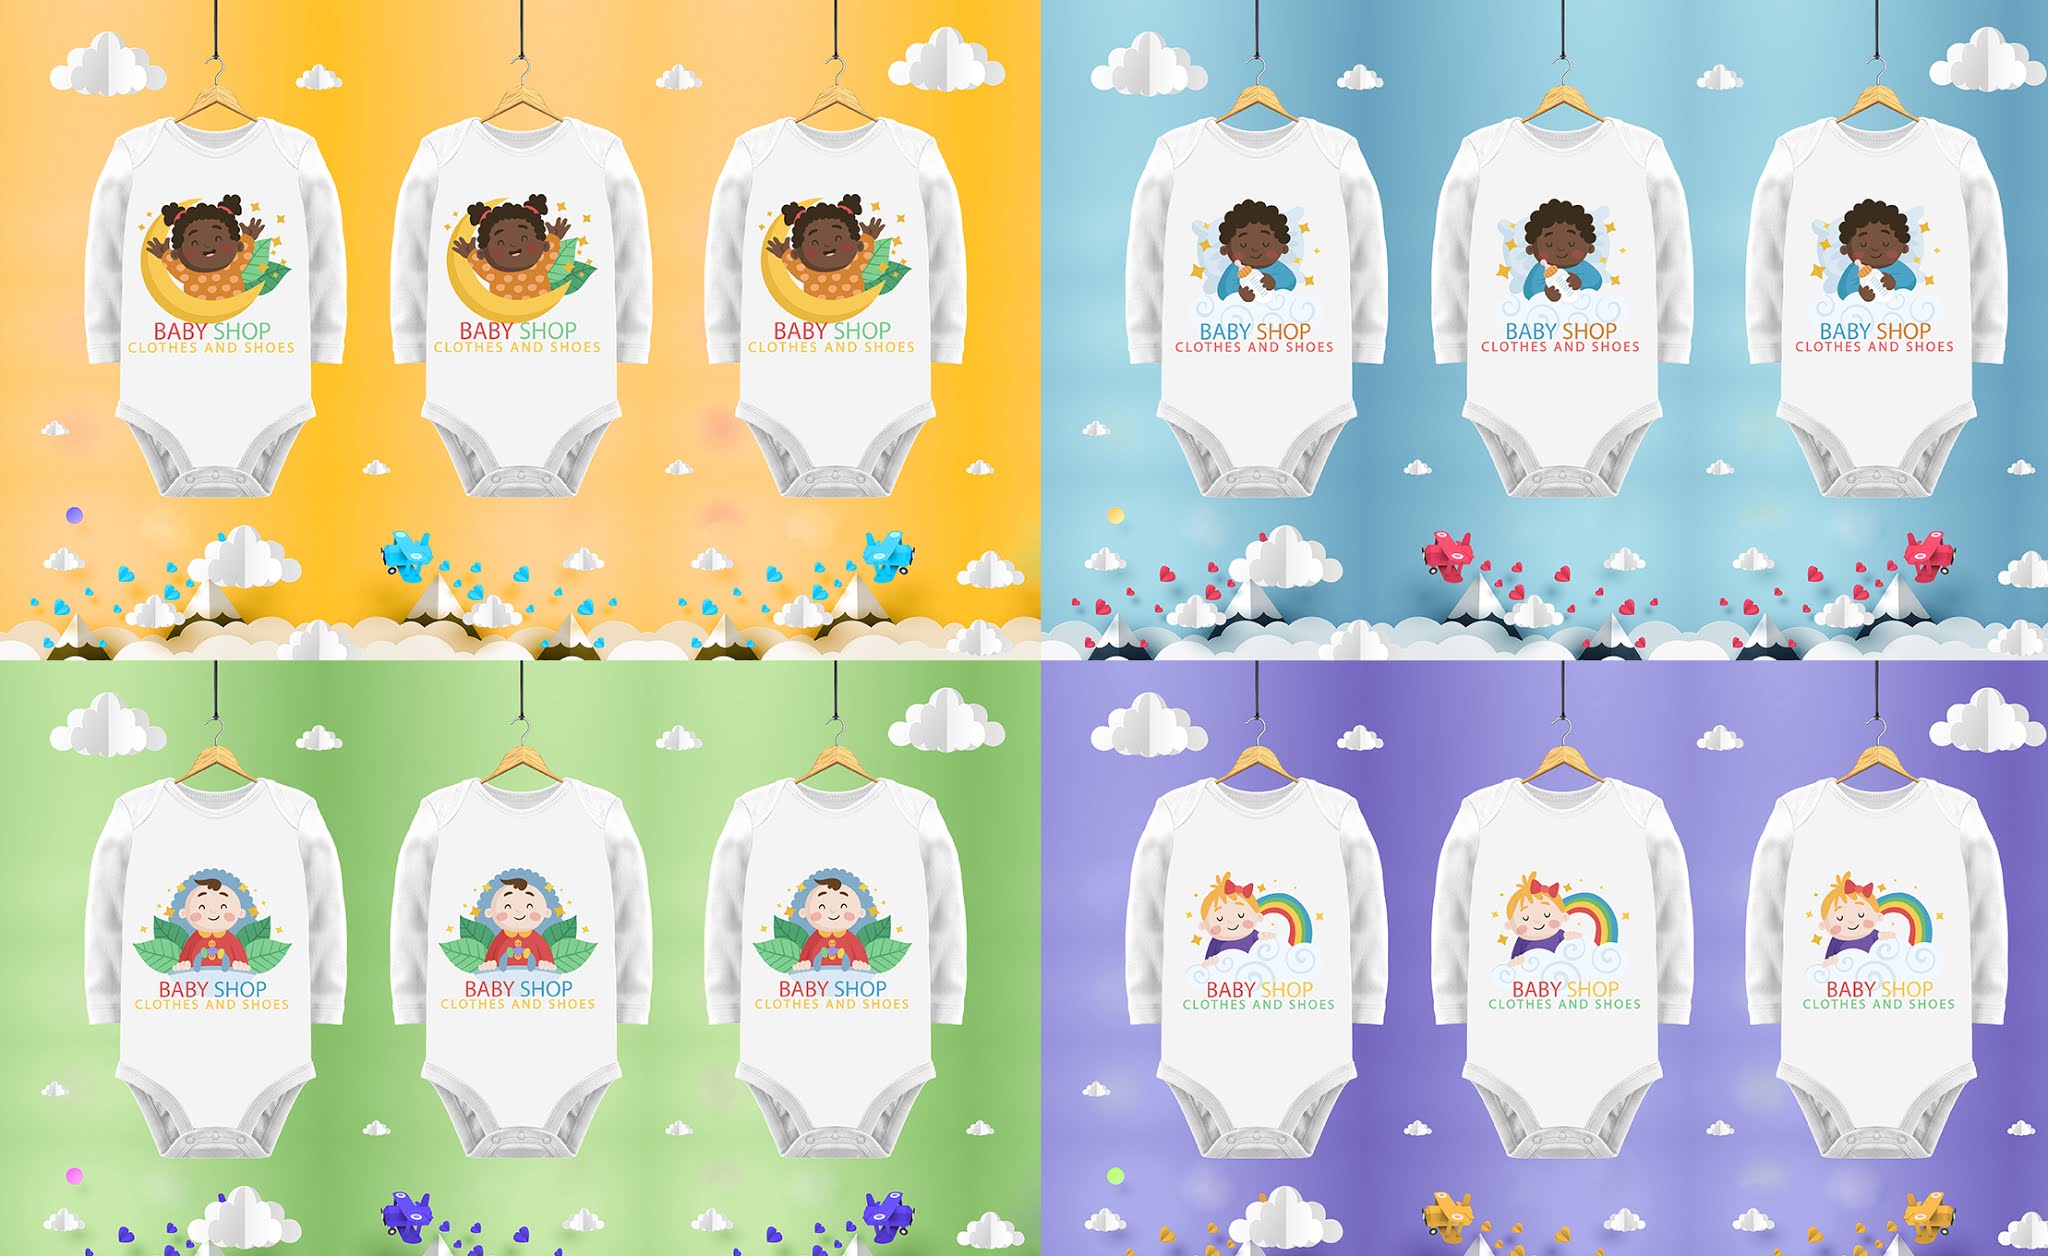 Bag designs psd for printing on children's clothes and T-shirts of the highest quality